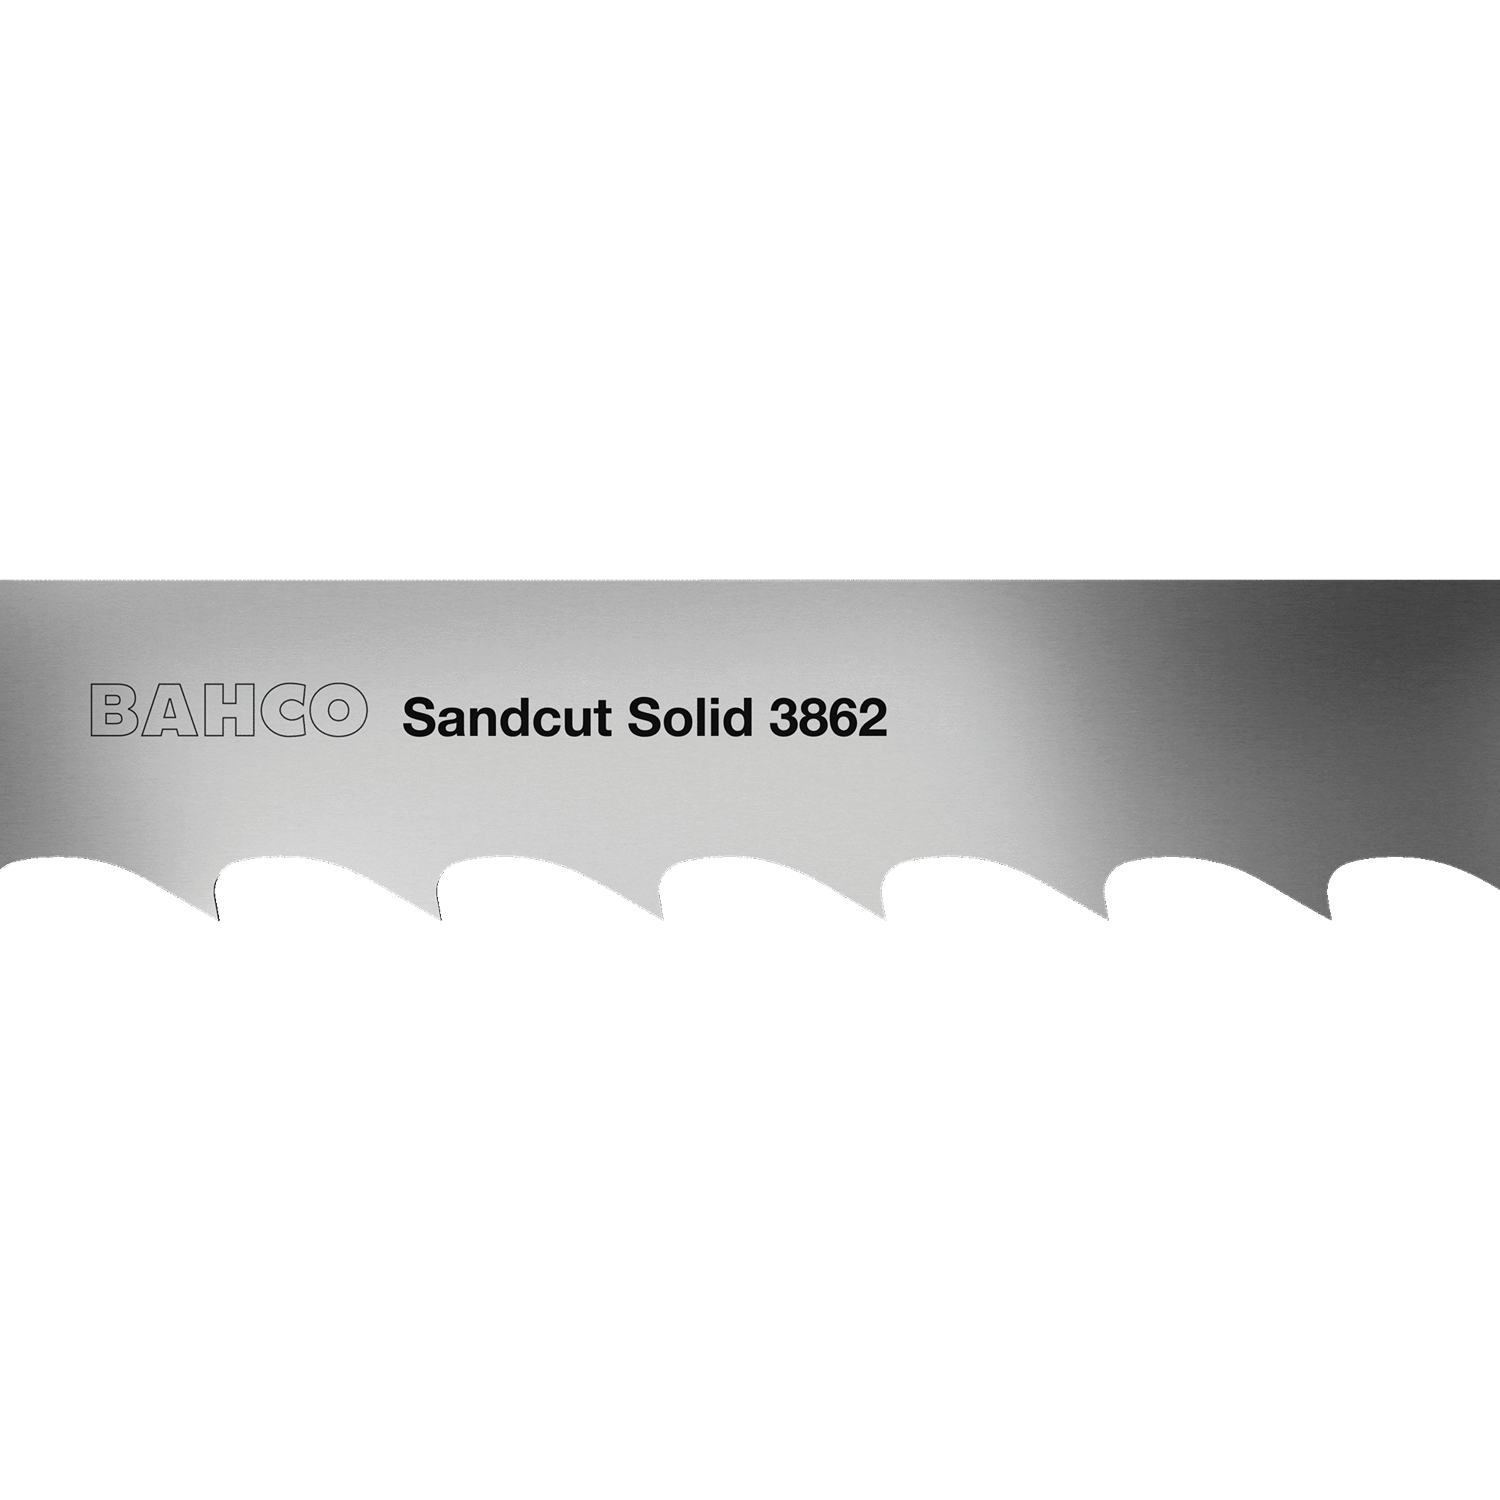 BAHCO 3862 Sandcut Solid Bandsaw Blade (BAHCO Tools) - Premium Bandsaw Blade from BAHCO - Shop now at Yew Aik.